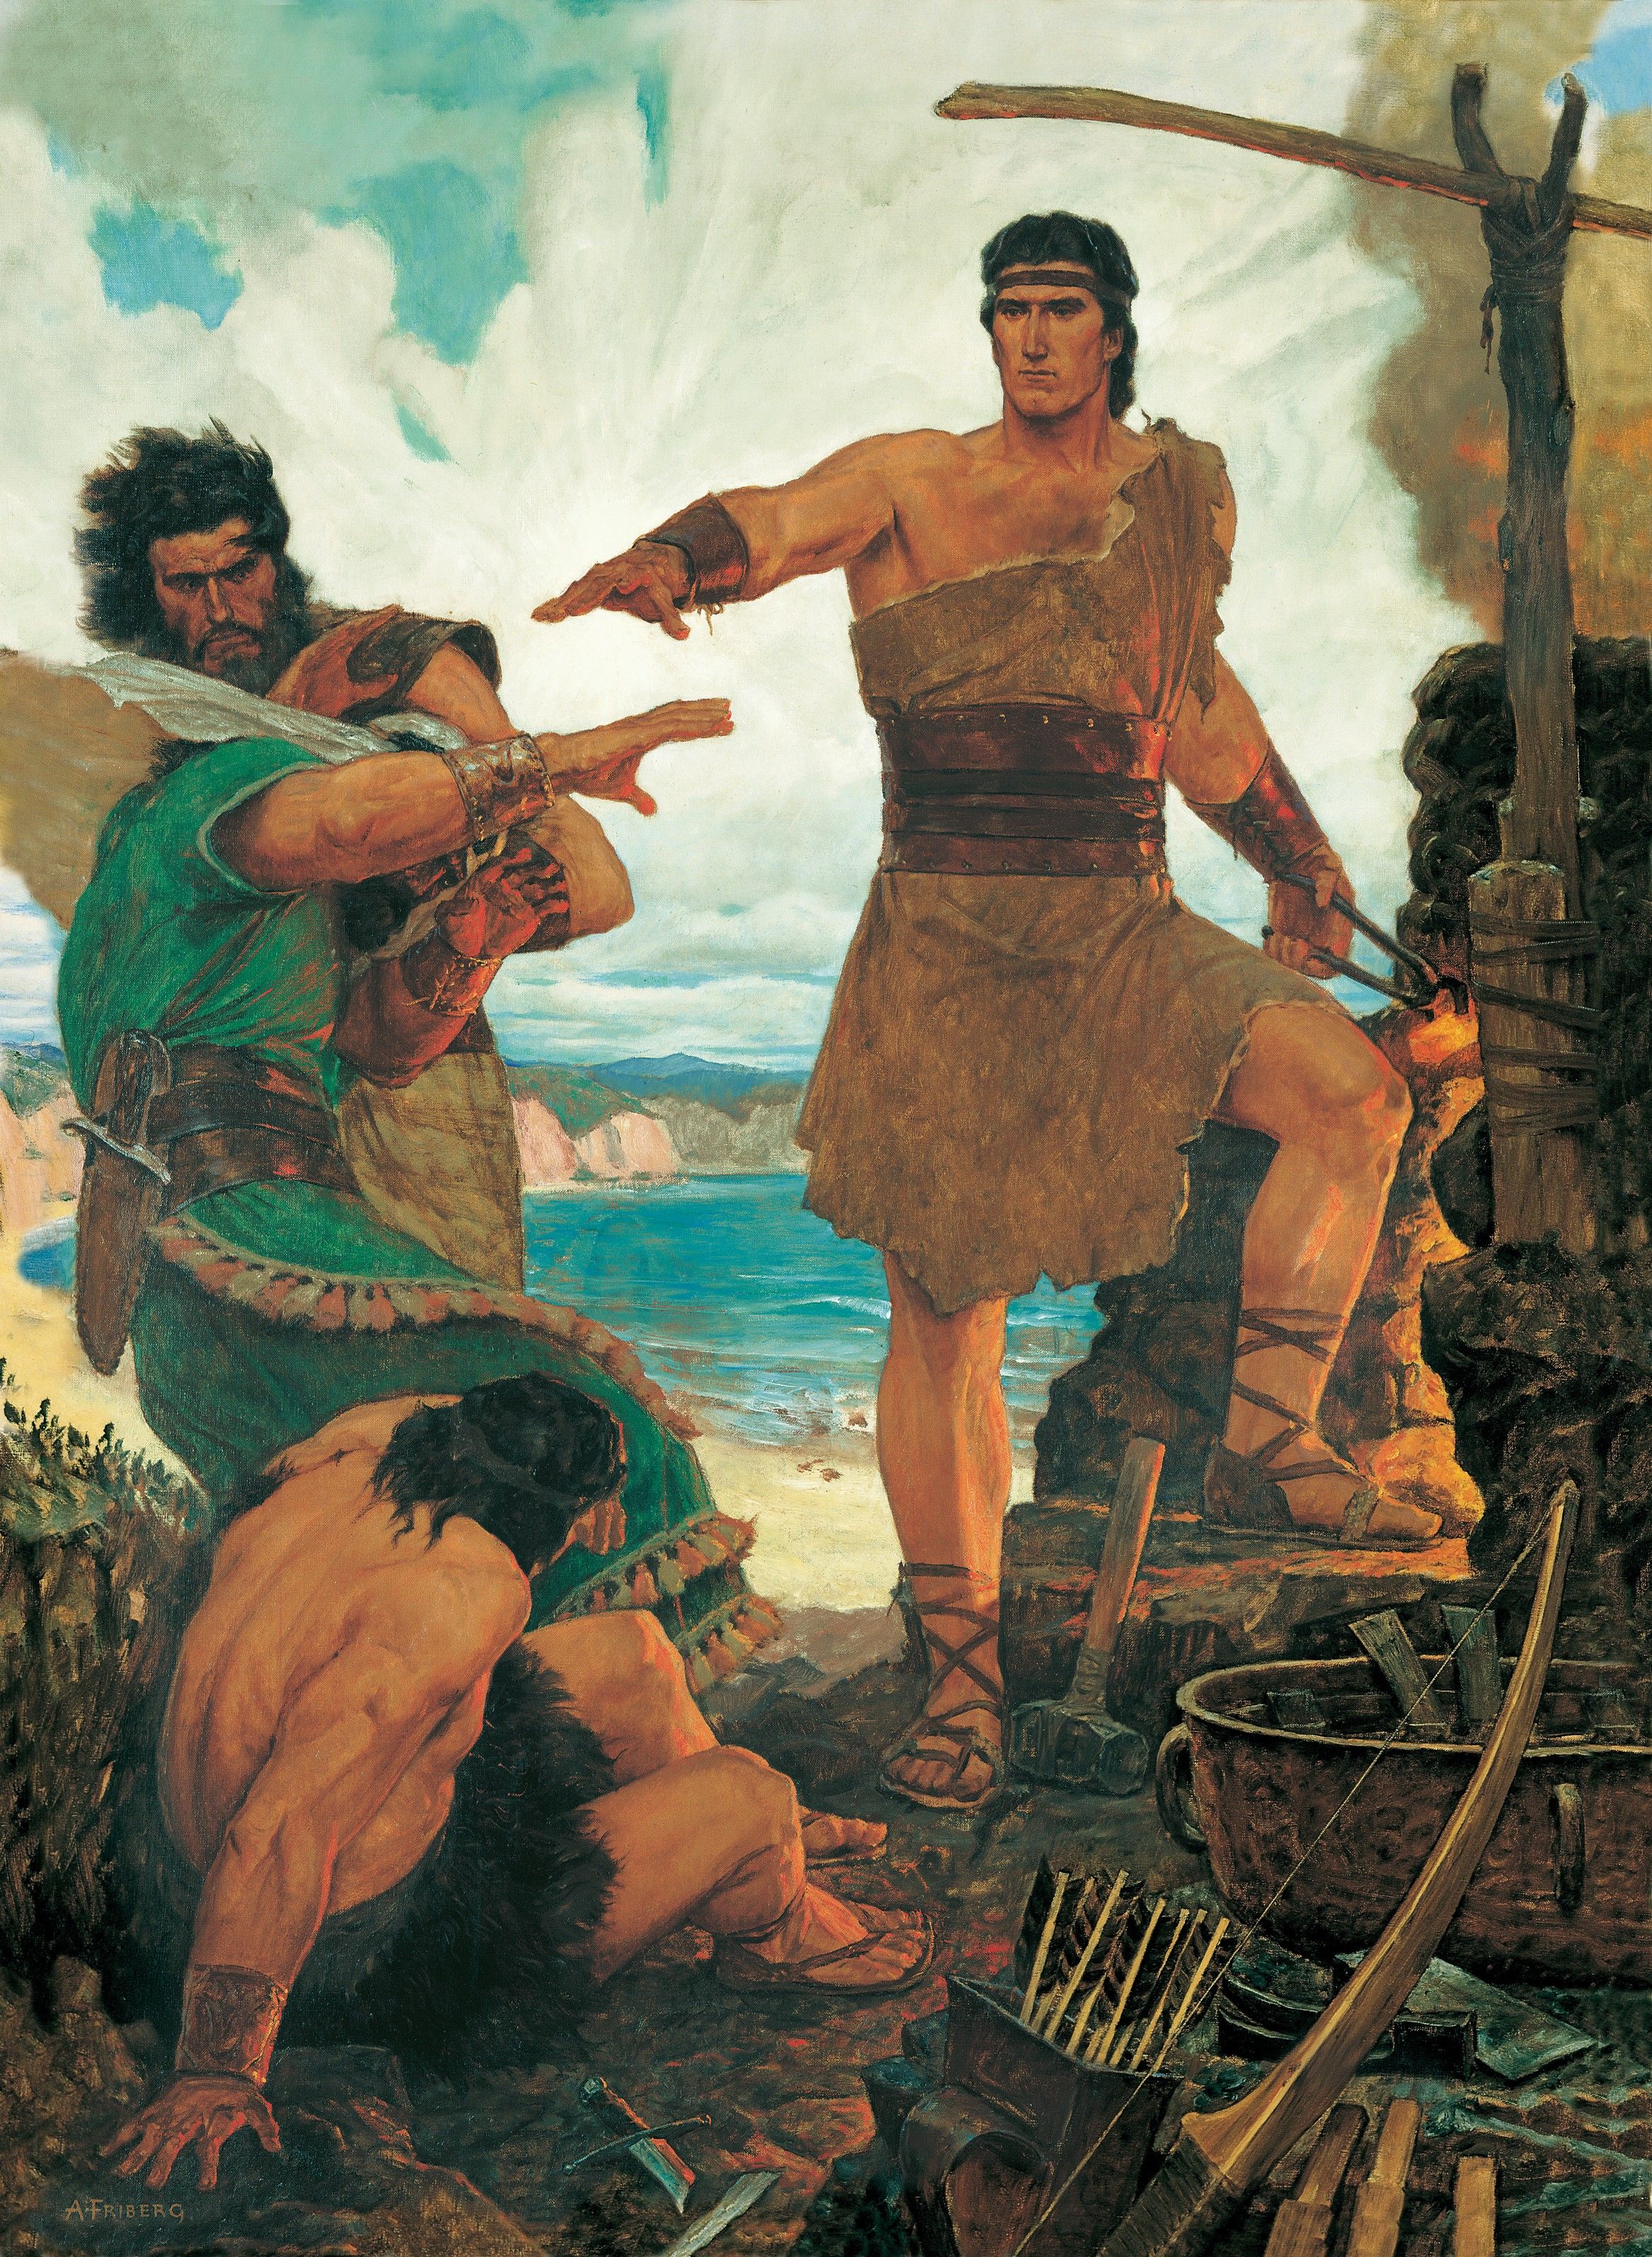 Nephi Subdues His Rebellious Brothers (Nephi Rebuking His Rebellious Brothers), by Arnold Friberg (62044); GAK 303; GAB 70; Primary manual 3-37; Primary manual 4-18; 1 Nephi 17:15–55